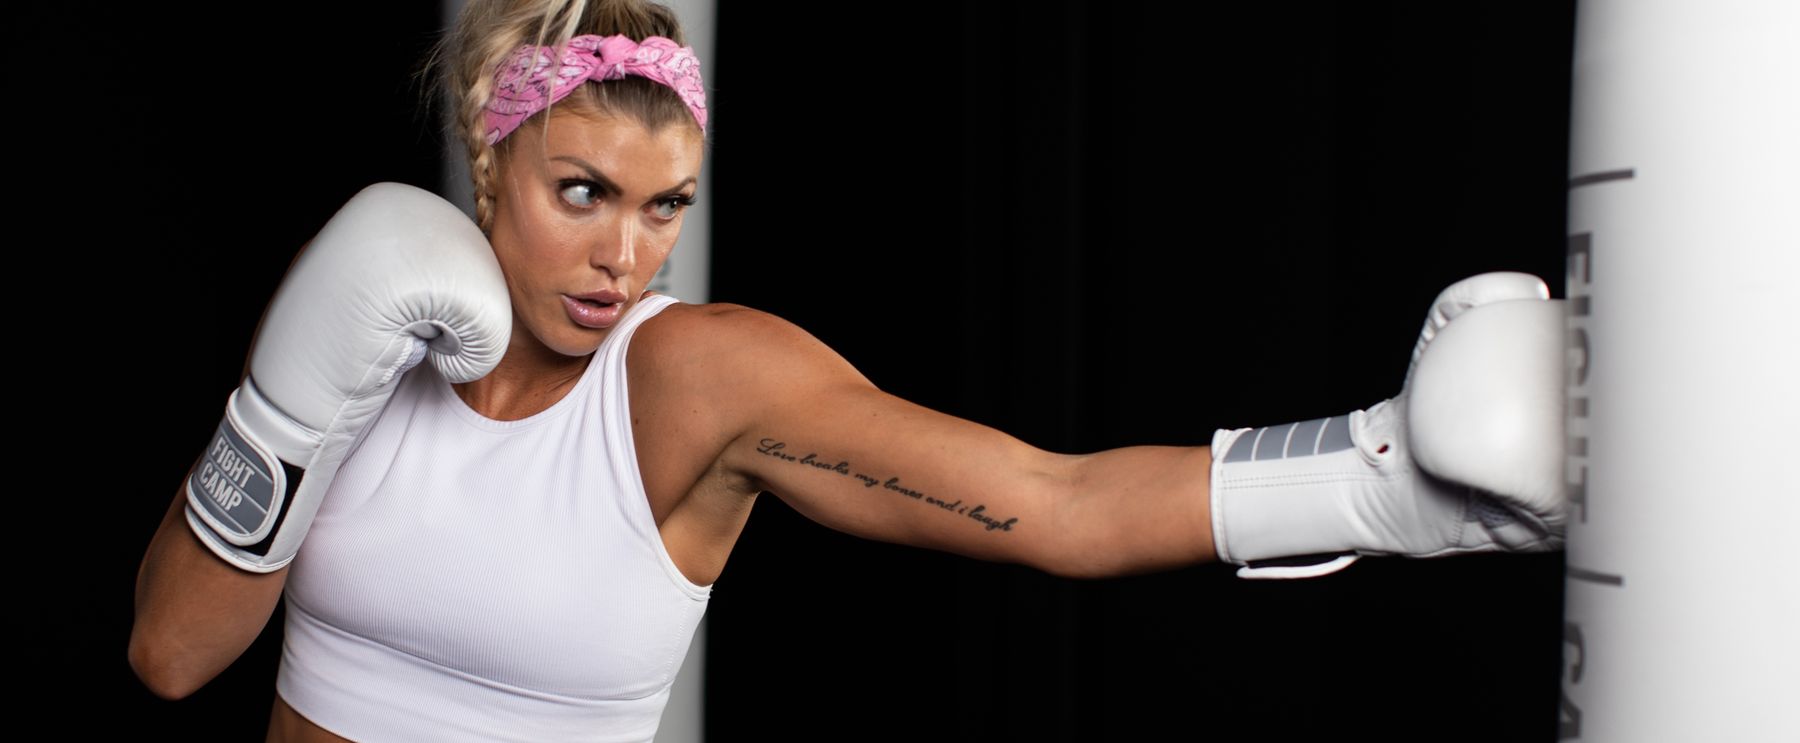 6 BEST Boxing Resources For Women